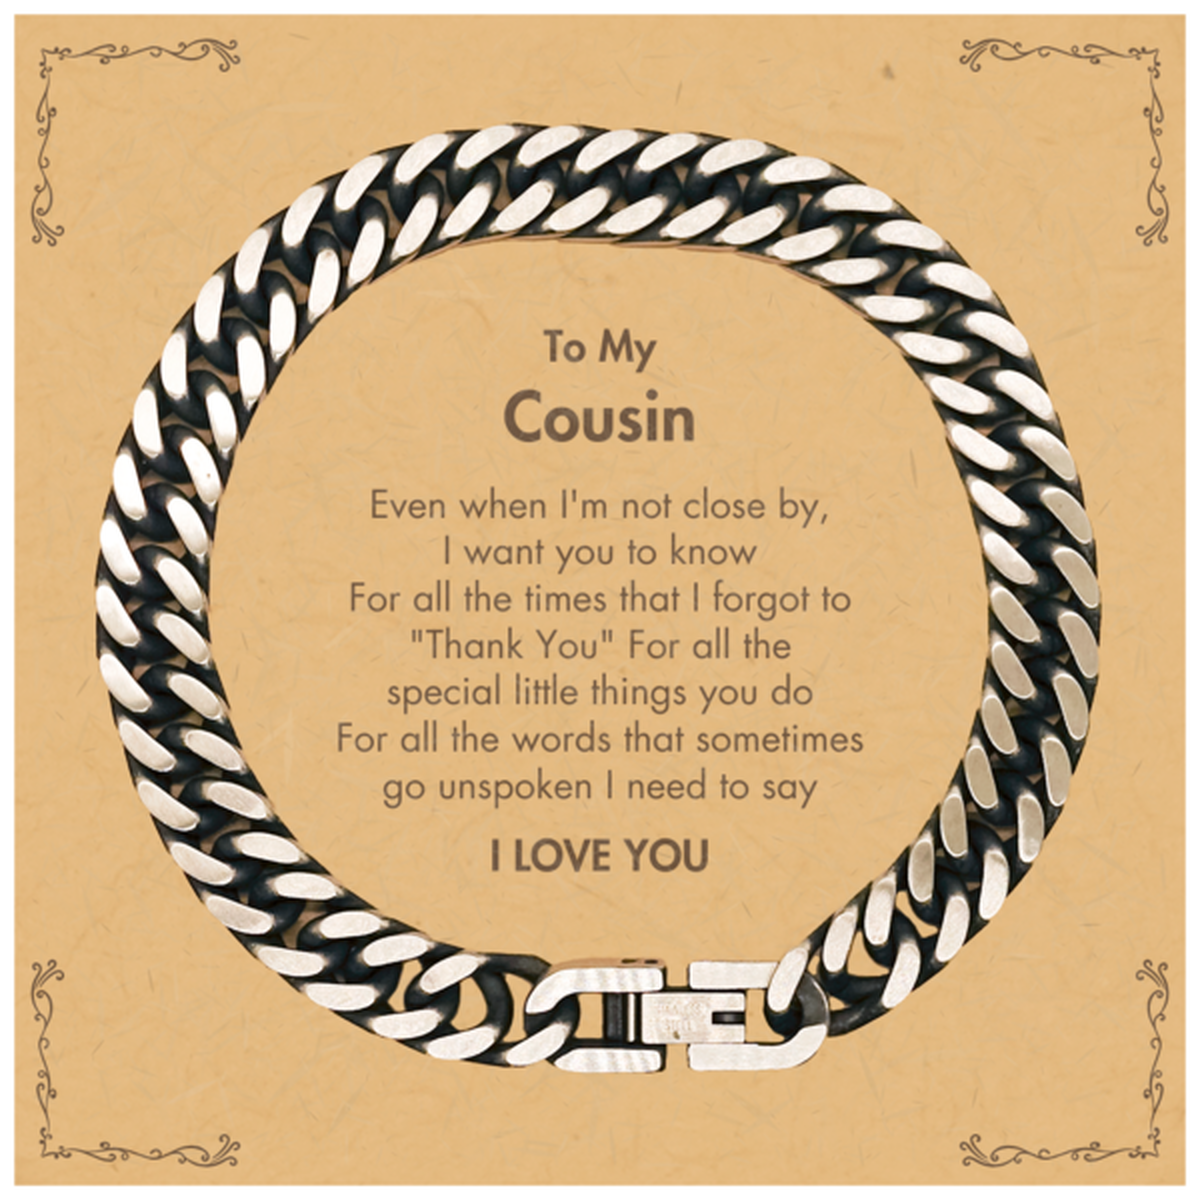 Thank You Gifts for Cousin, Keepsake Cuban Link Chain Bracelet Gifts for Cousin Birthday Mother's day Father's Day Cousin For all the words That sometimes go unspoken I need to say I LOVE YOU